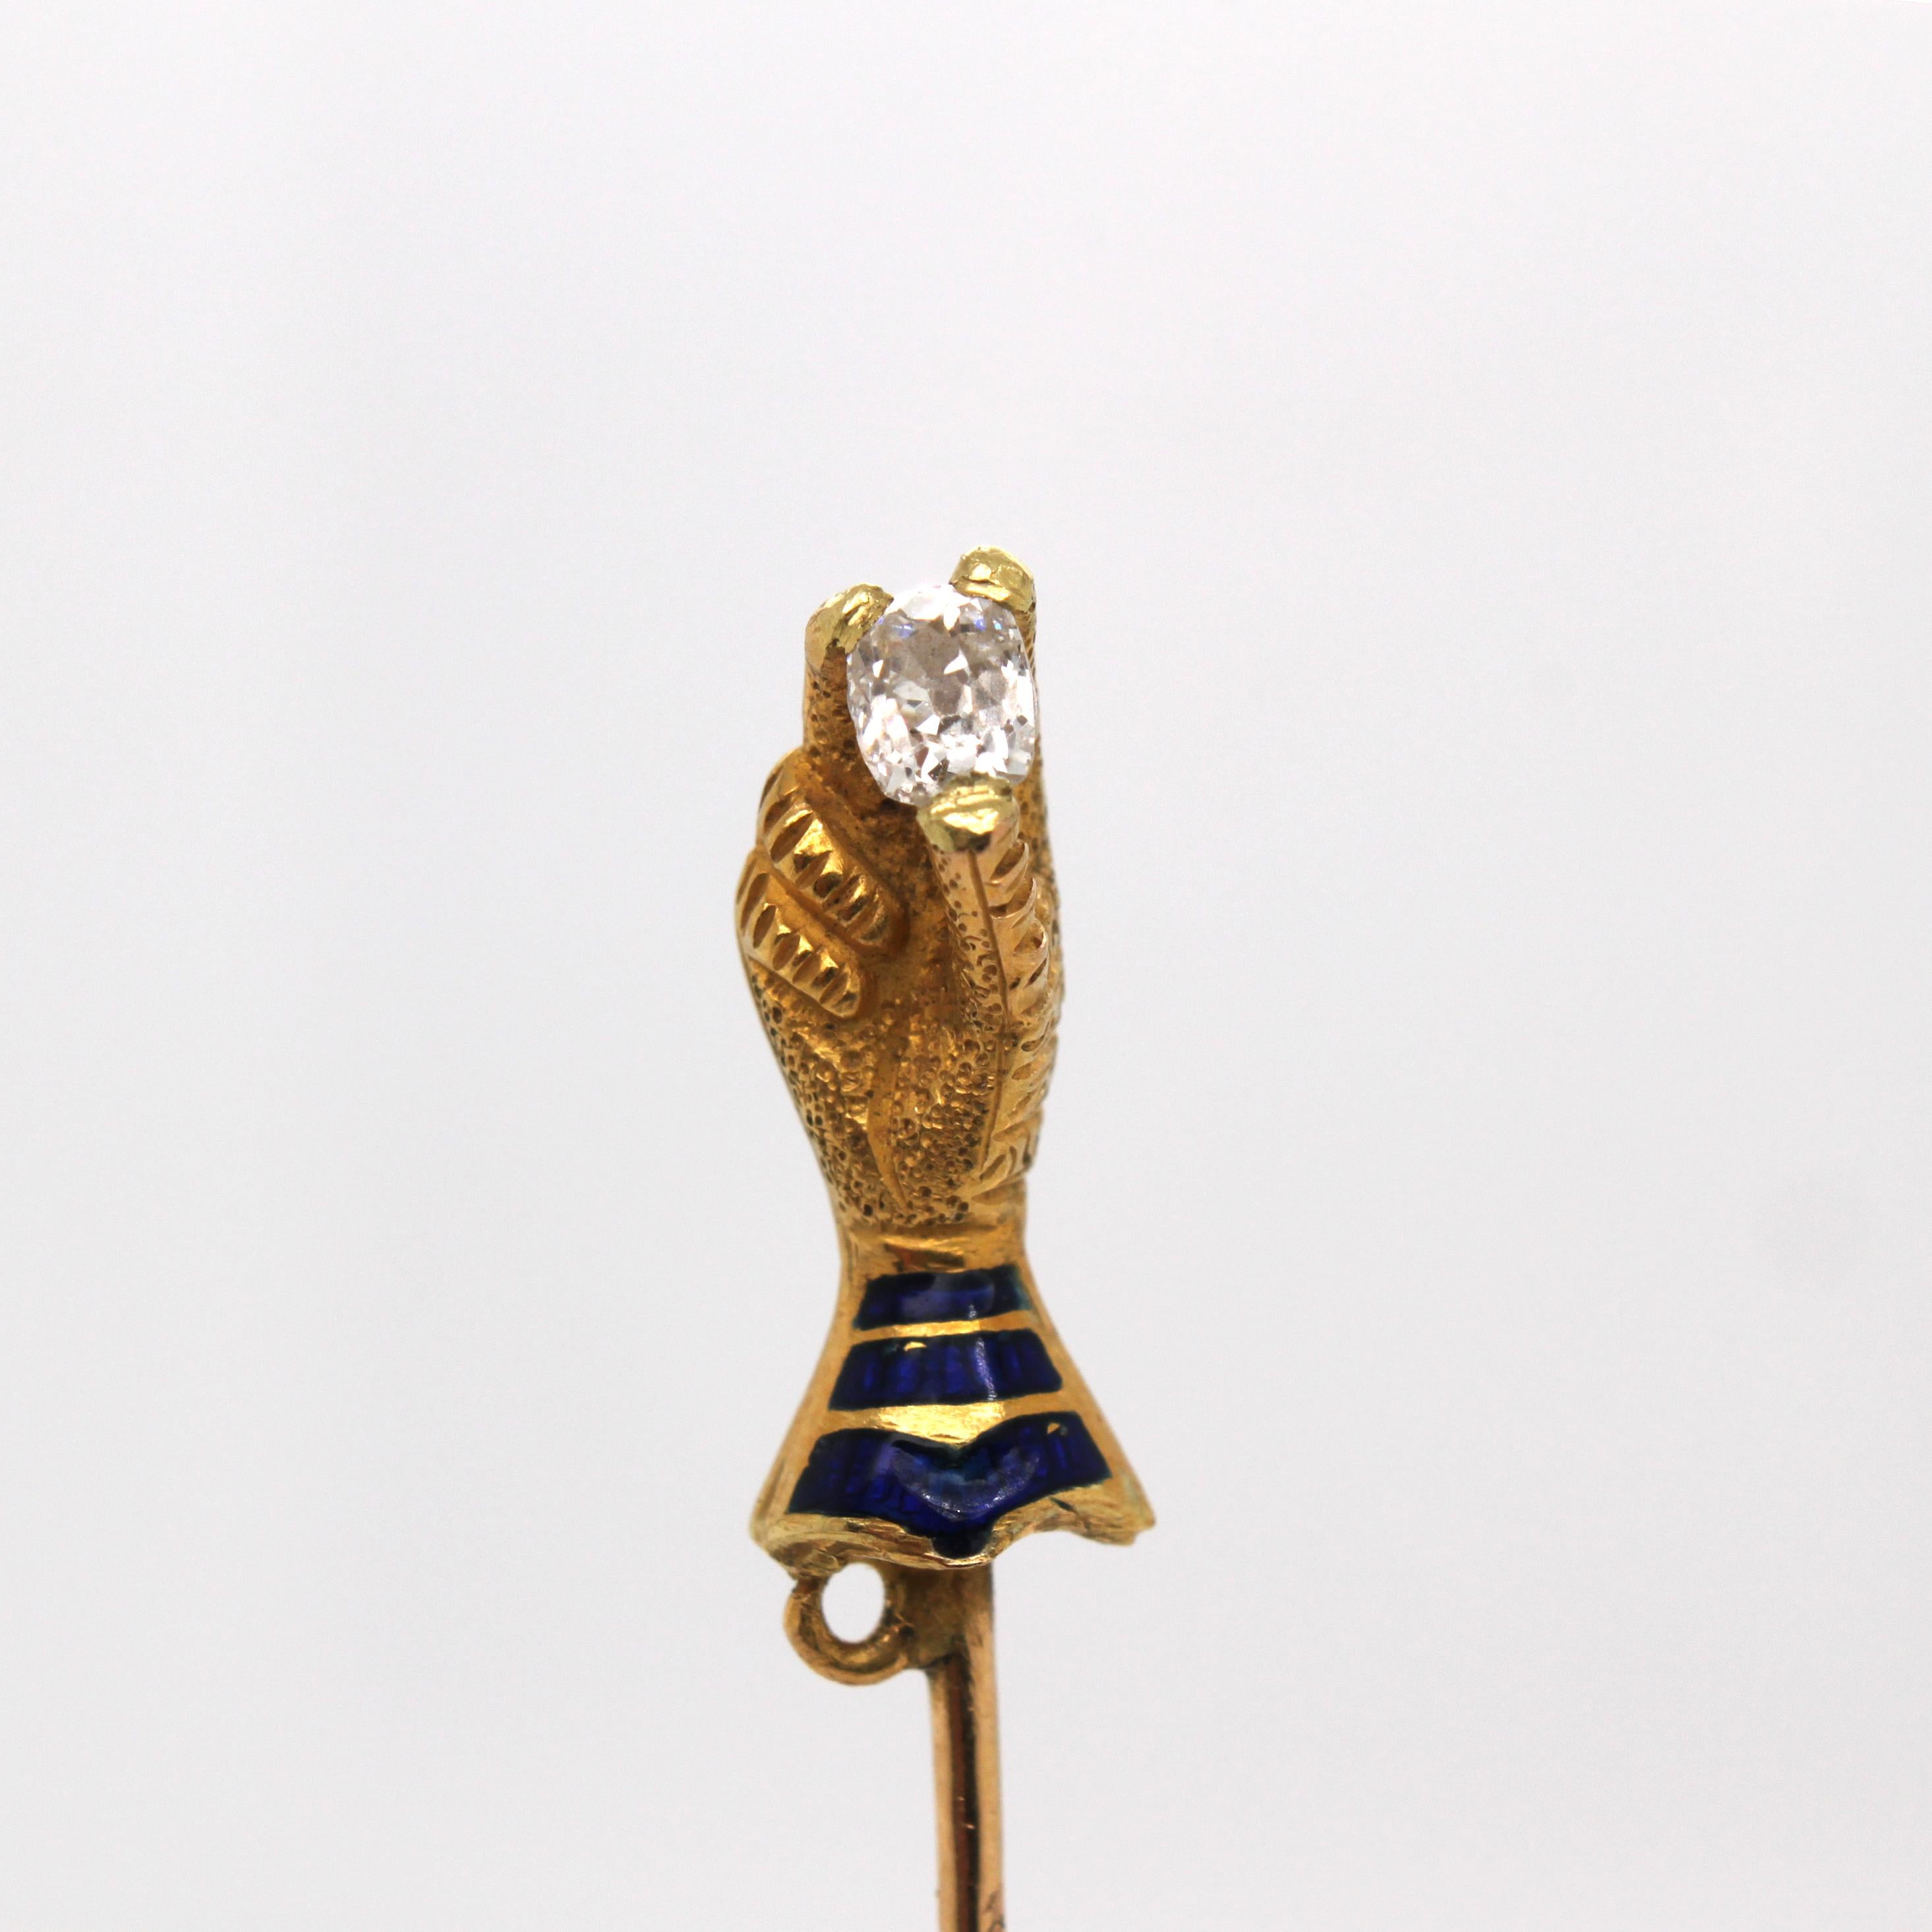 Hand Holding Diamond Enamel and Gold Stick Pin, ca. 1910s

A very unique stick pin, depicting a gloved hand holding a very sweet old-mine cushion cut diamond (ca. 0.2 carats). The hem of the glove is blue enamelled. The glove itself is made with